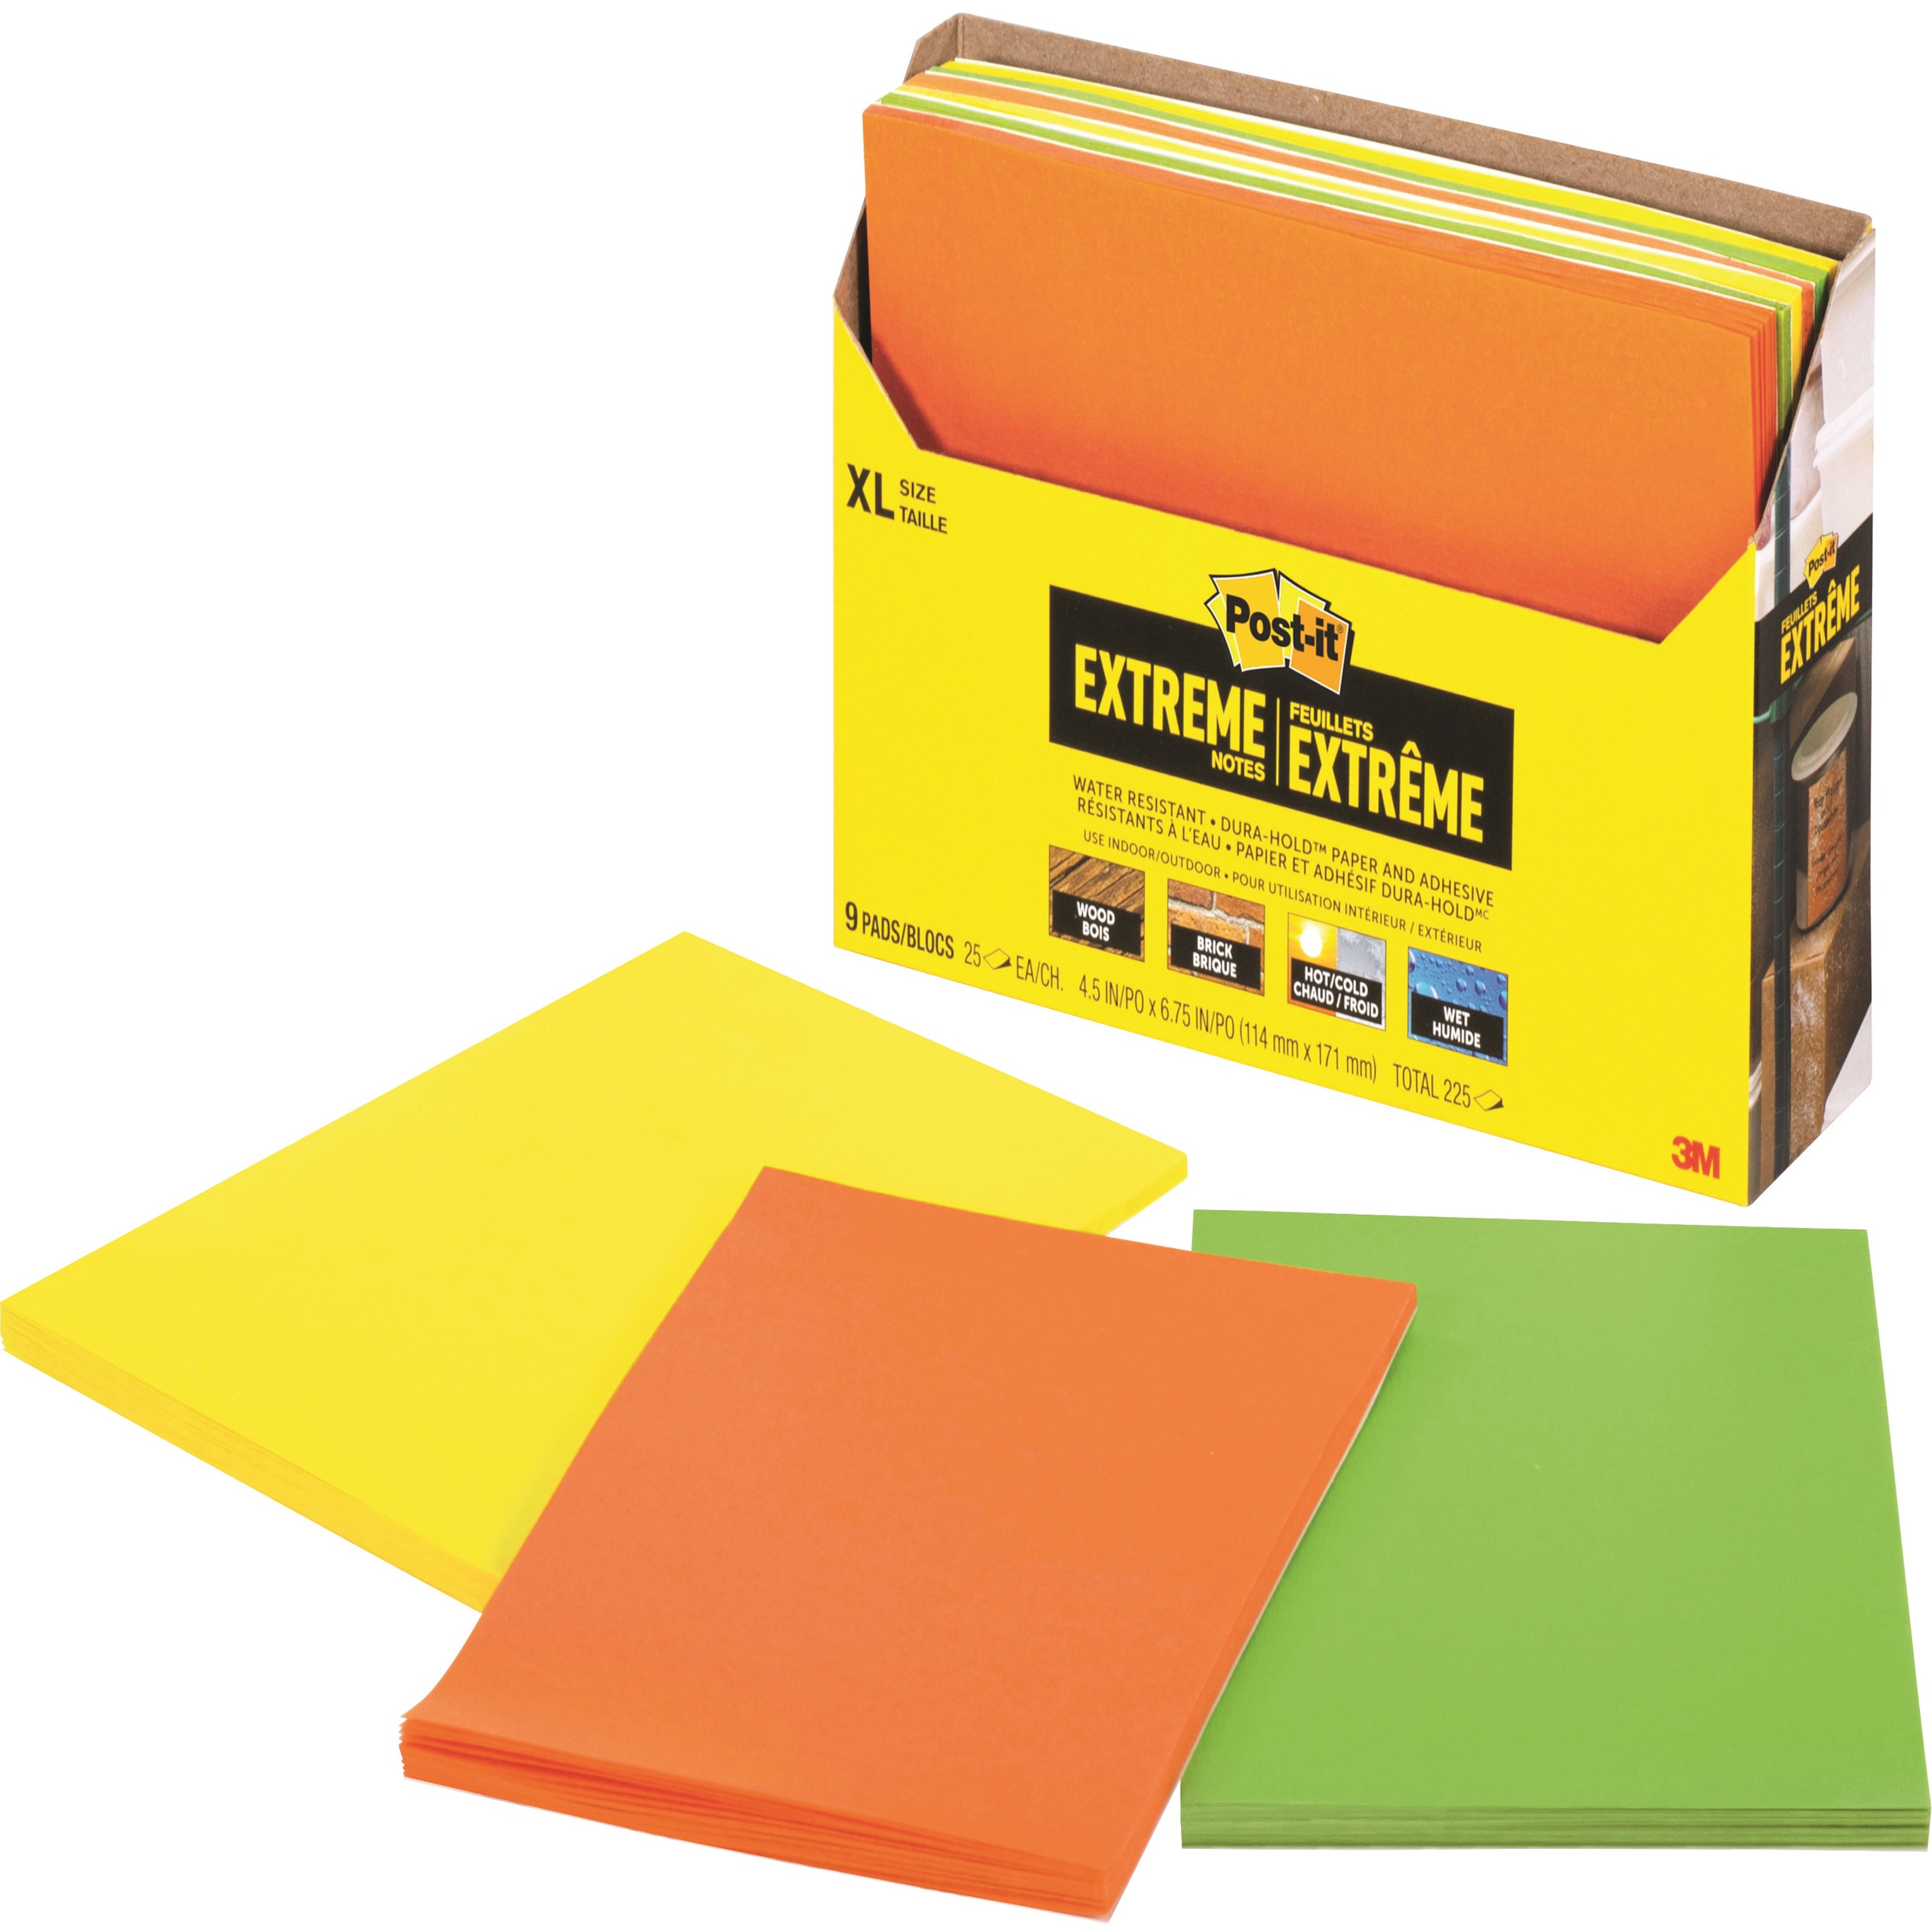 Post-it, MMMXT4569CT, XL Extreme Notes, 9 Per Pack, Multicolour